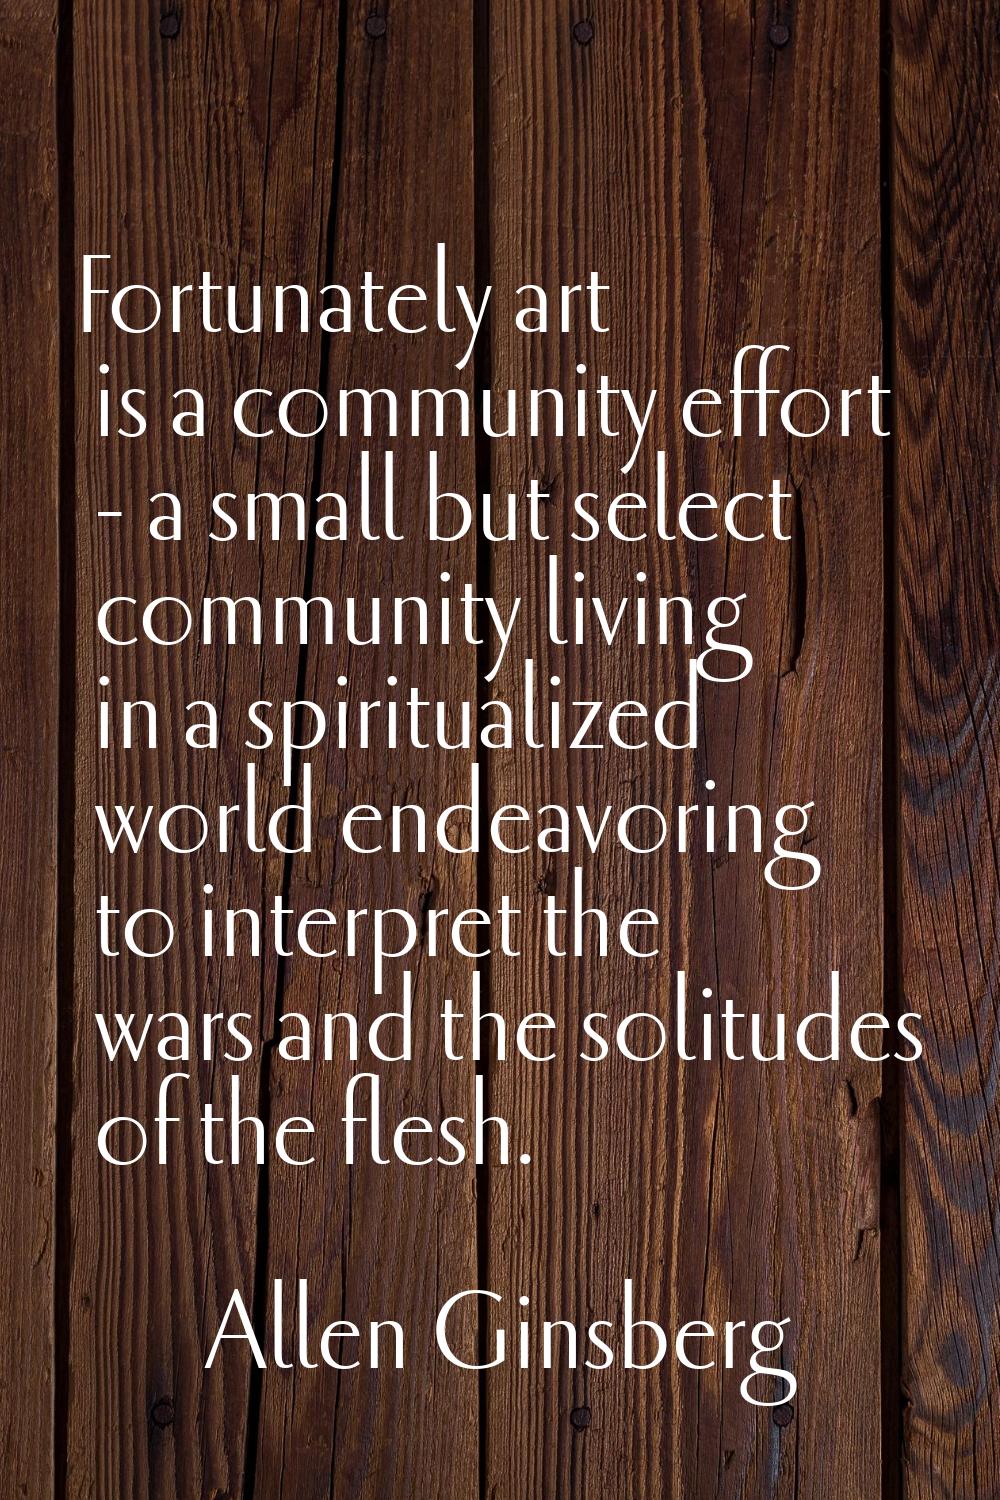 Fortunately art is a community effort - a small but select community living in a spiritualized worl